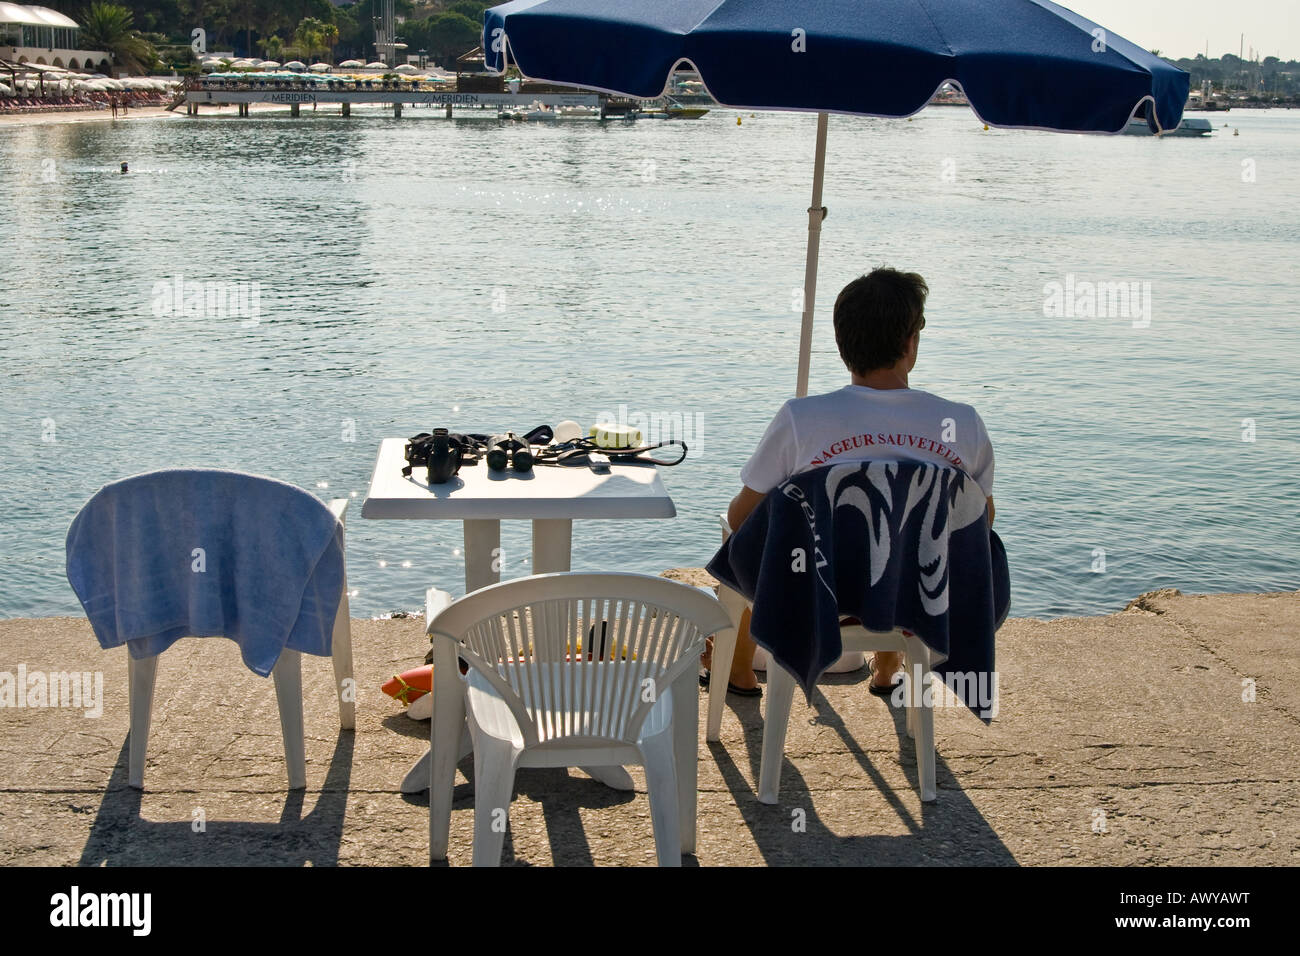 Lifeguard observing area in front of private and public beaches in Juan les Pins French Riviera Stock Photo